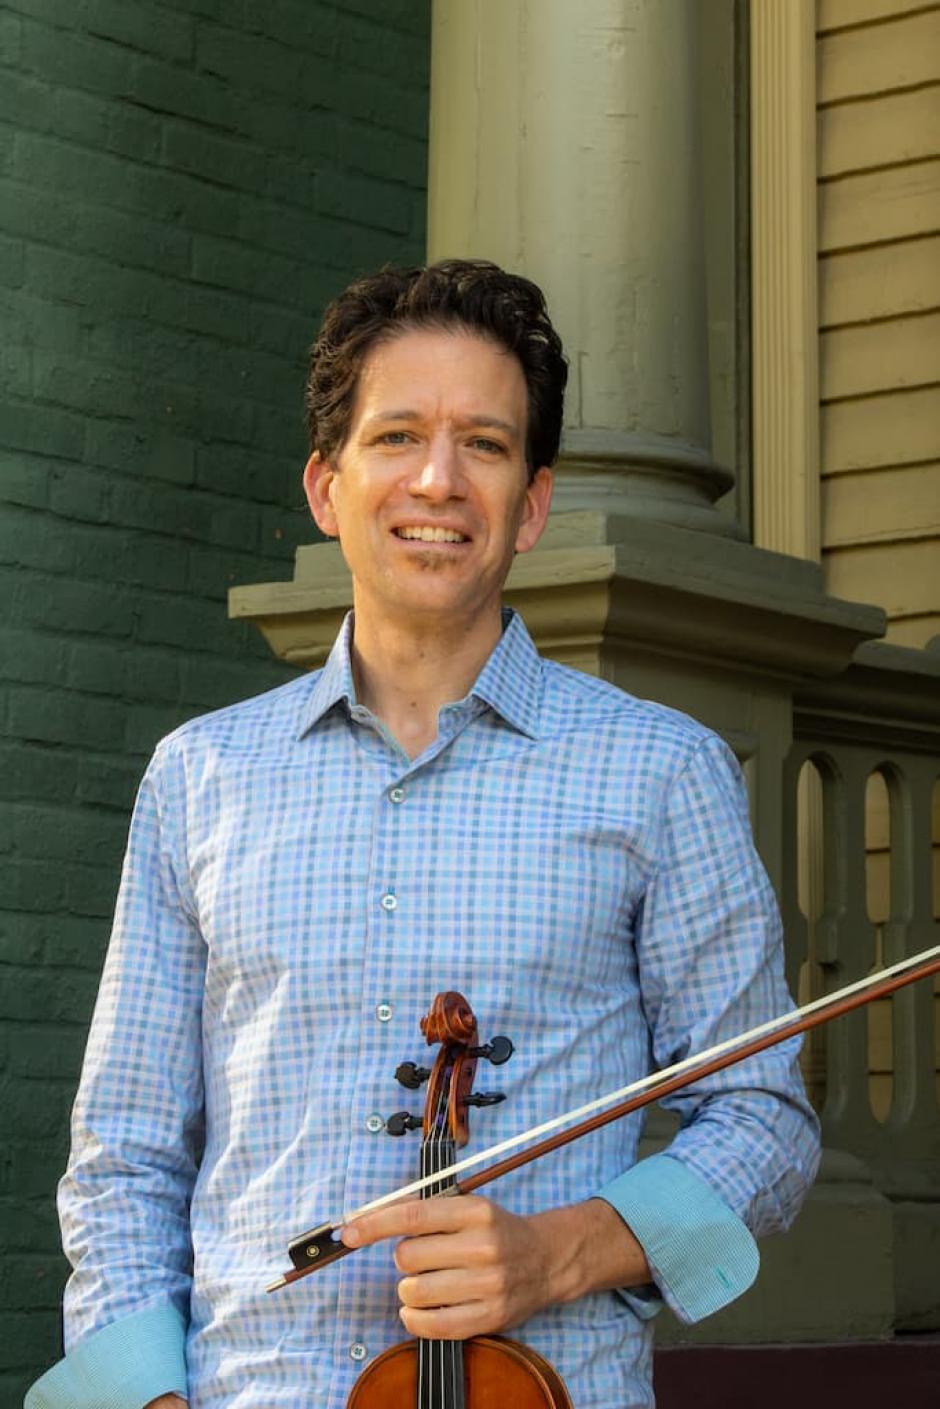 Sebastian Ruth holds a violin and bow while smiling into the camera